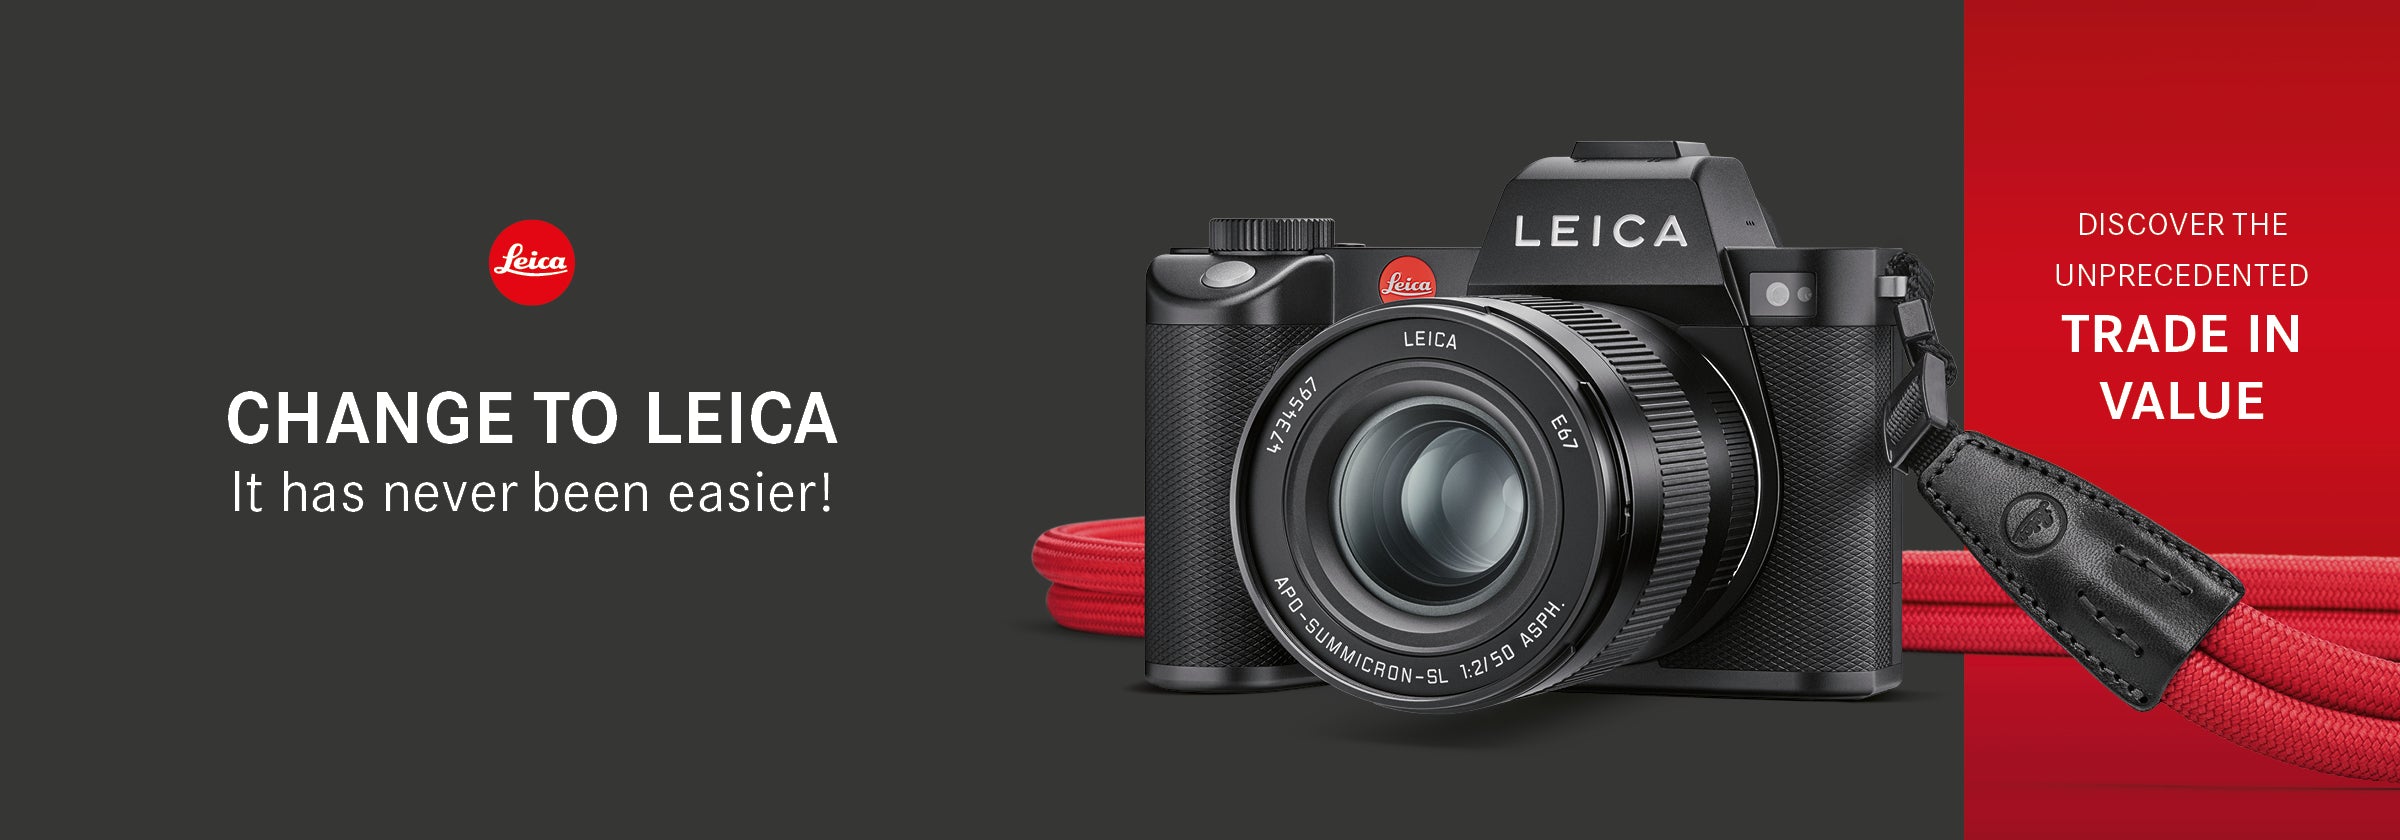 Change to Leica - It has never been easier!